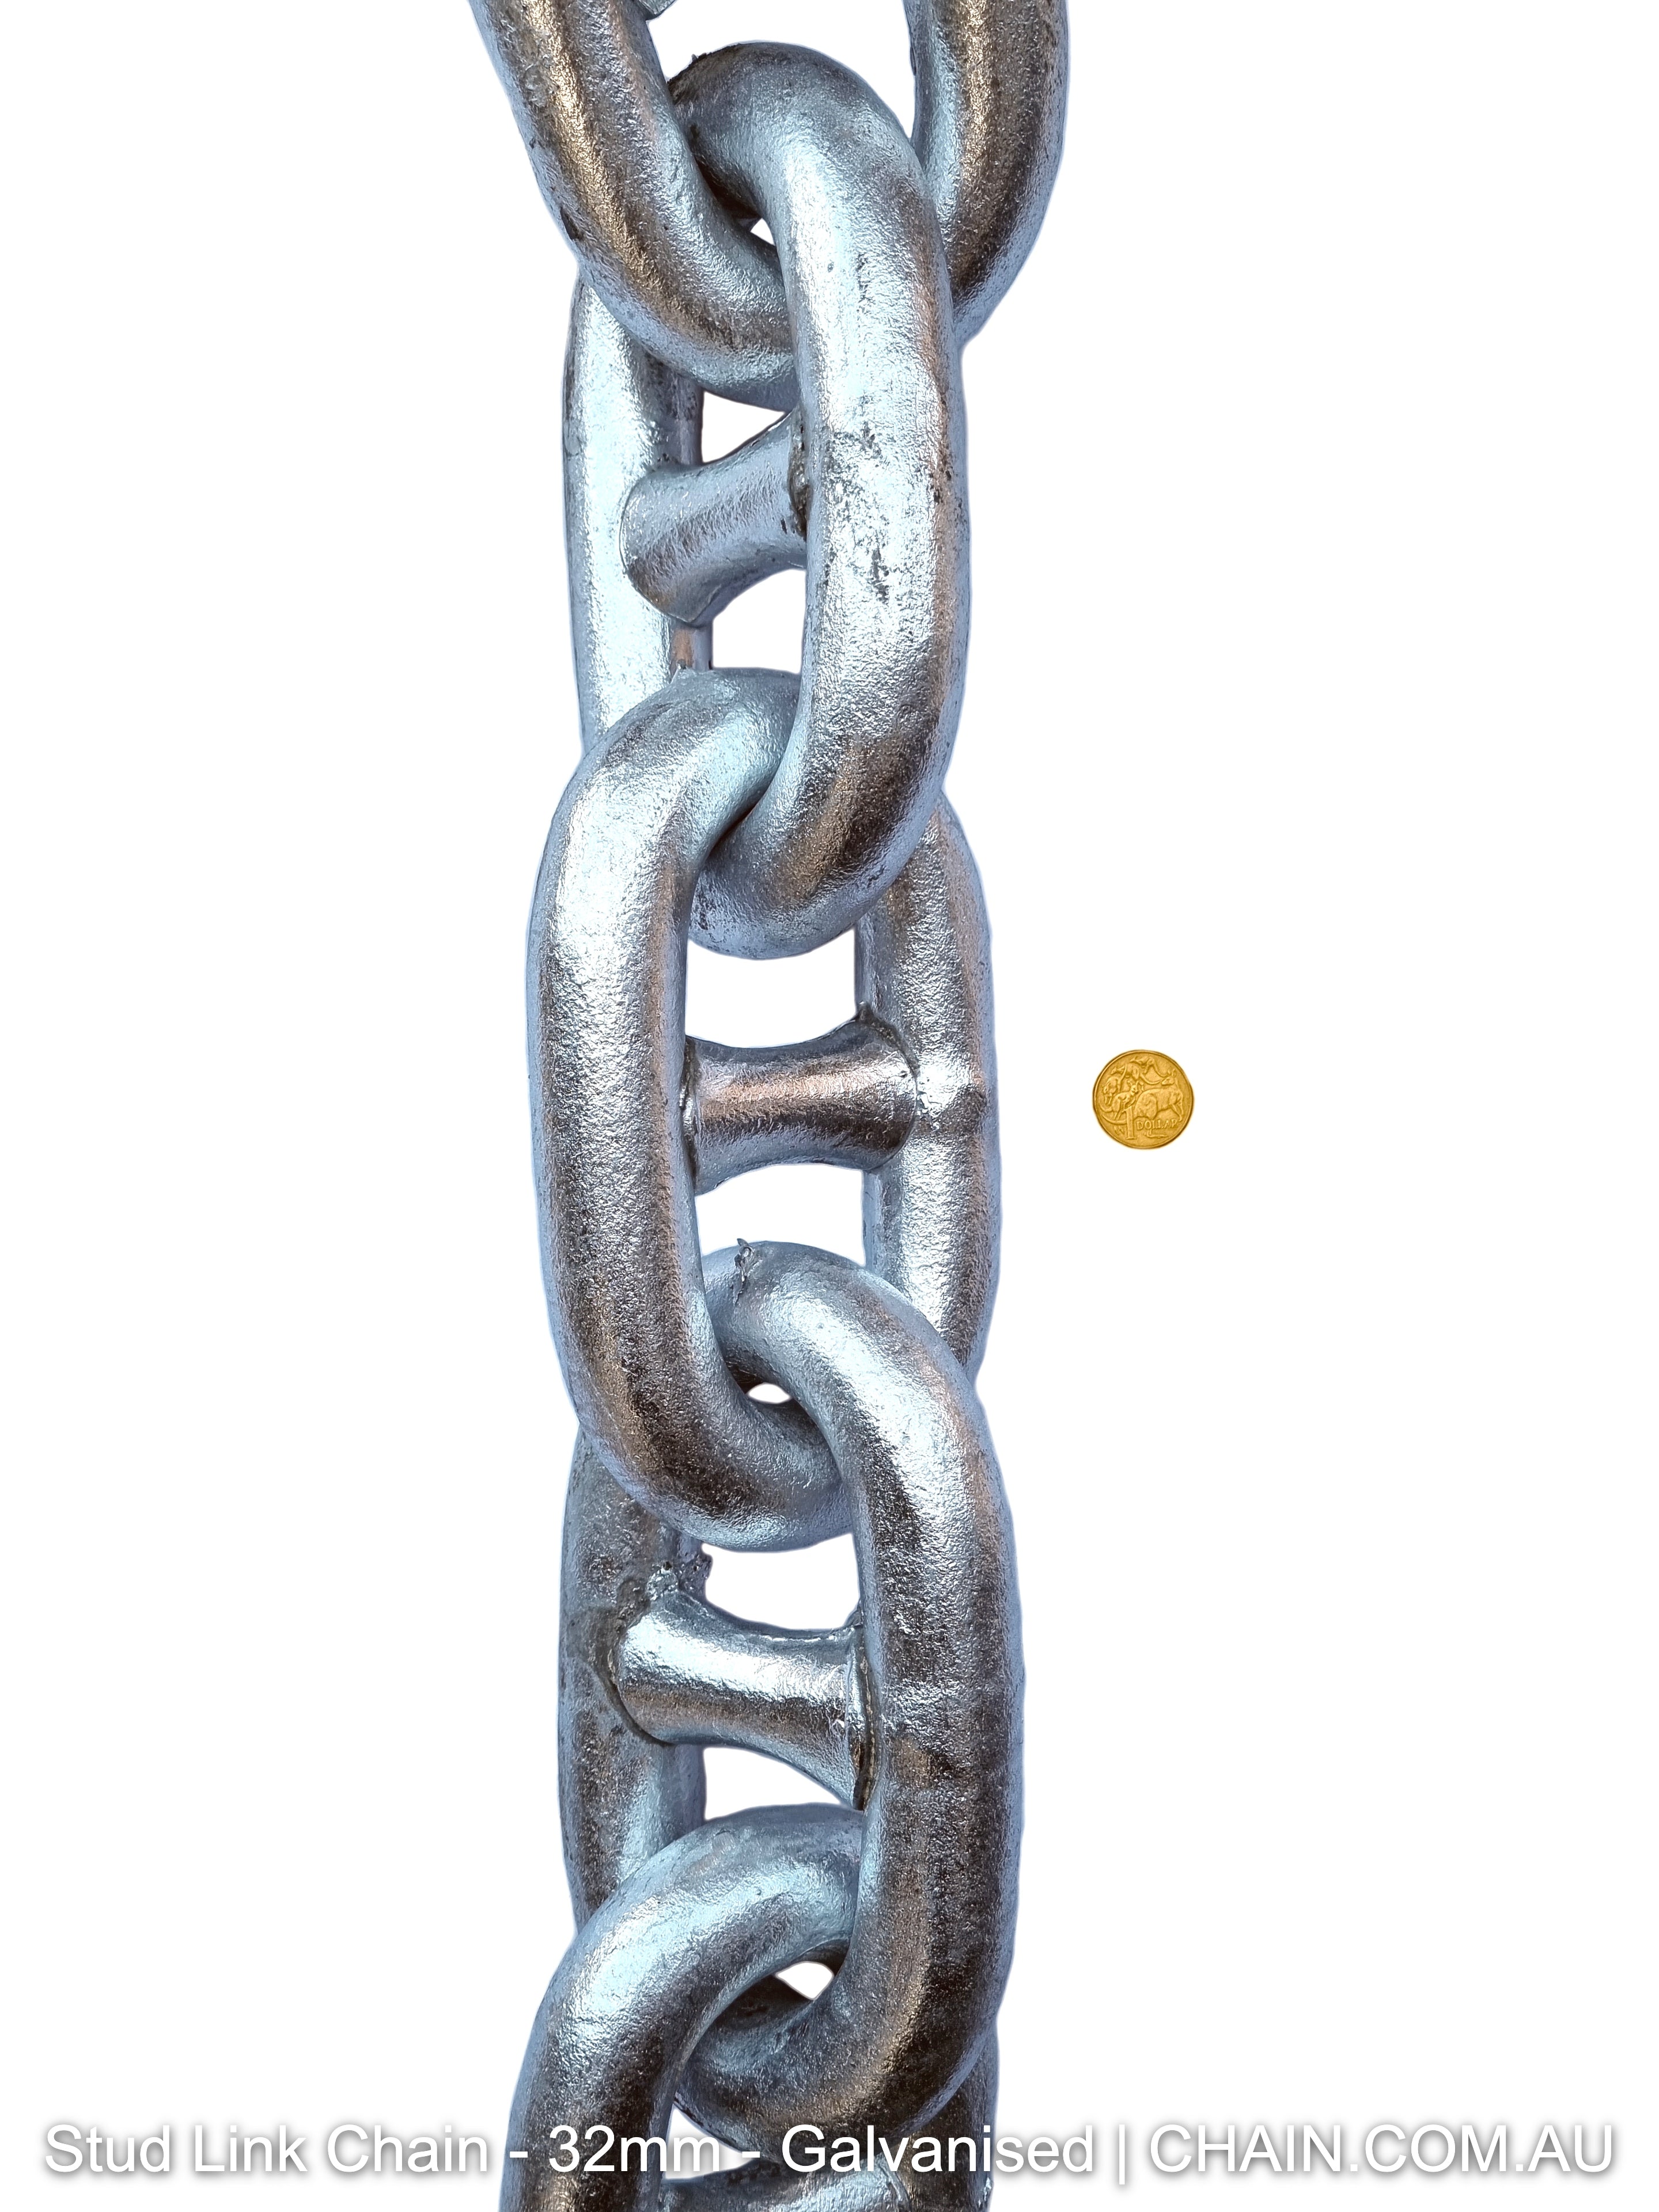 Stud Link Chain - 32mm - Galvanised - EMAIL or CALL TO ORDER (POA)